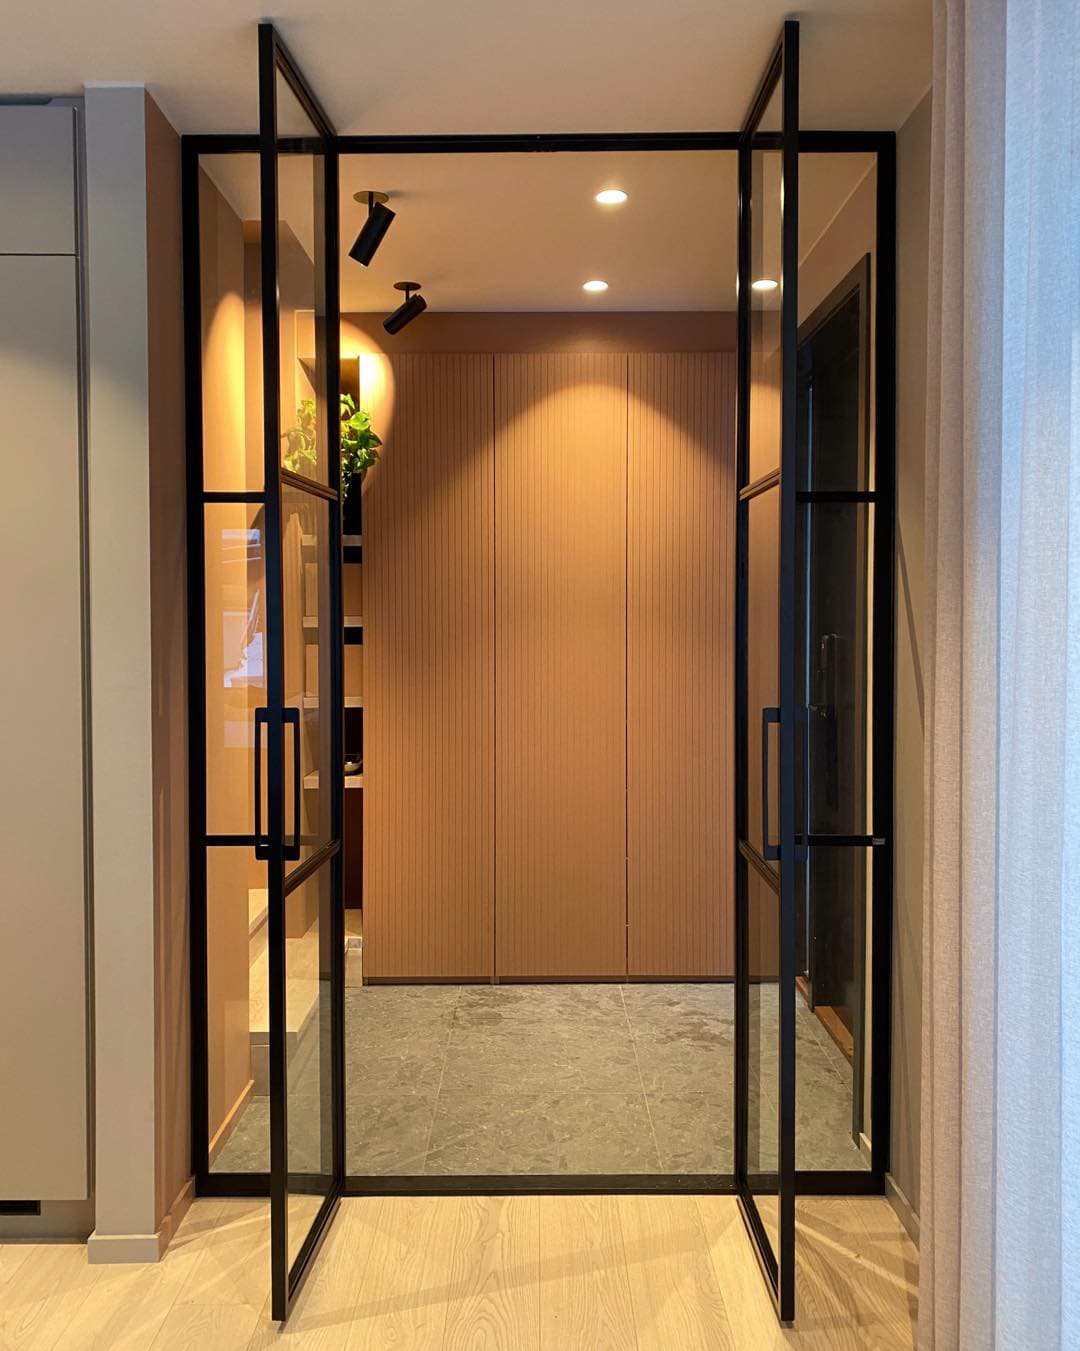 Glass Doors: A Clear Investment in Financial Interior Design